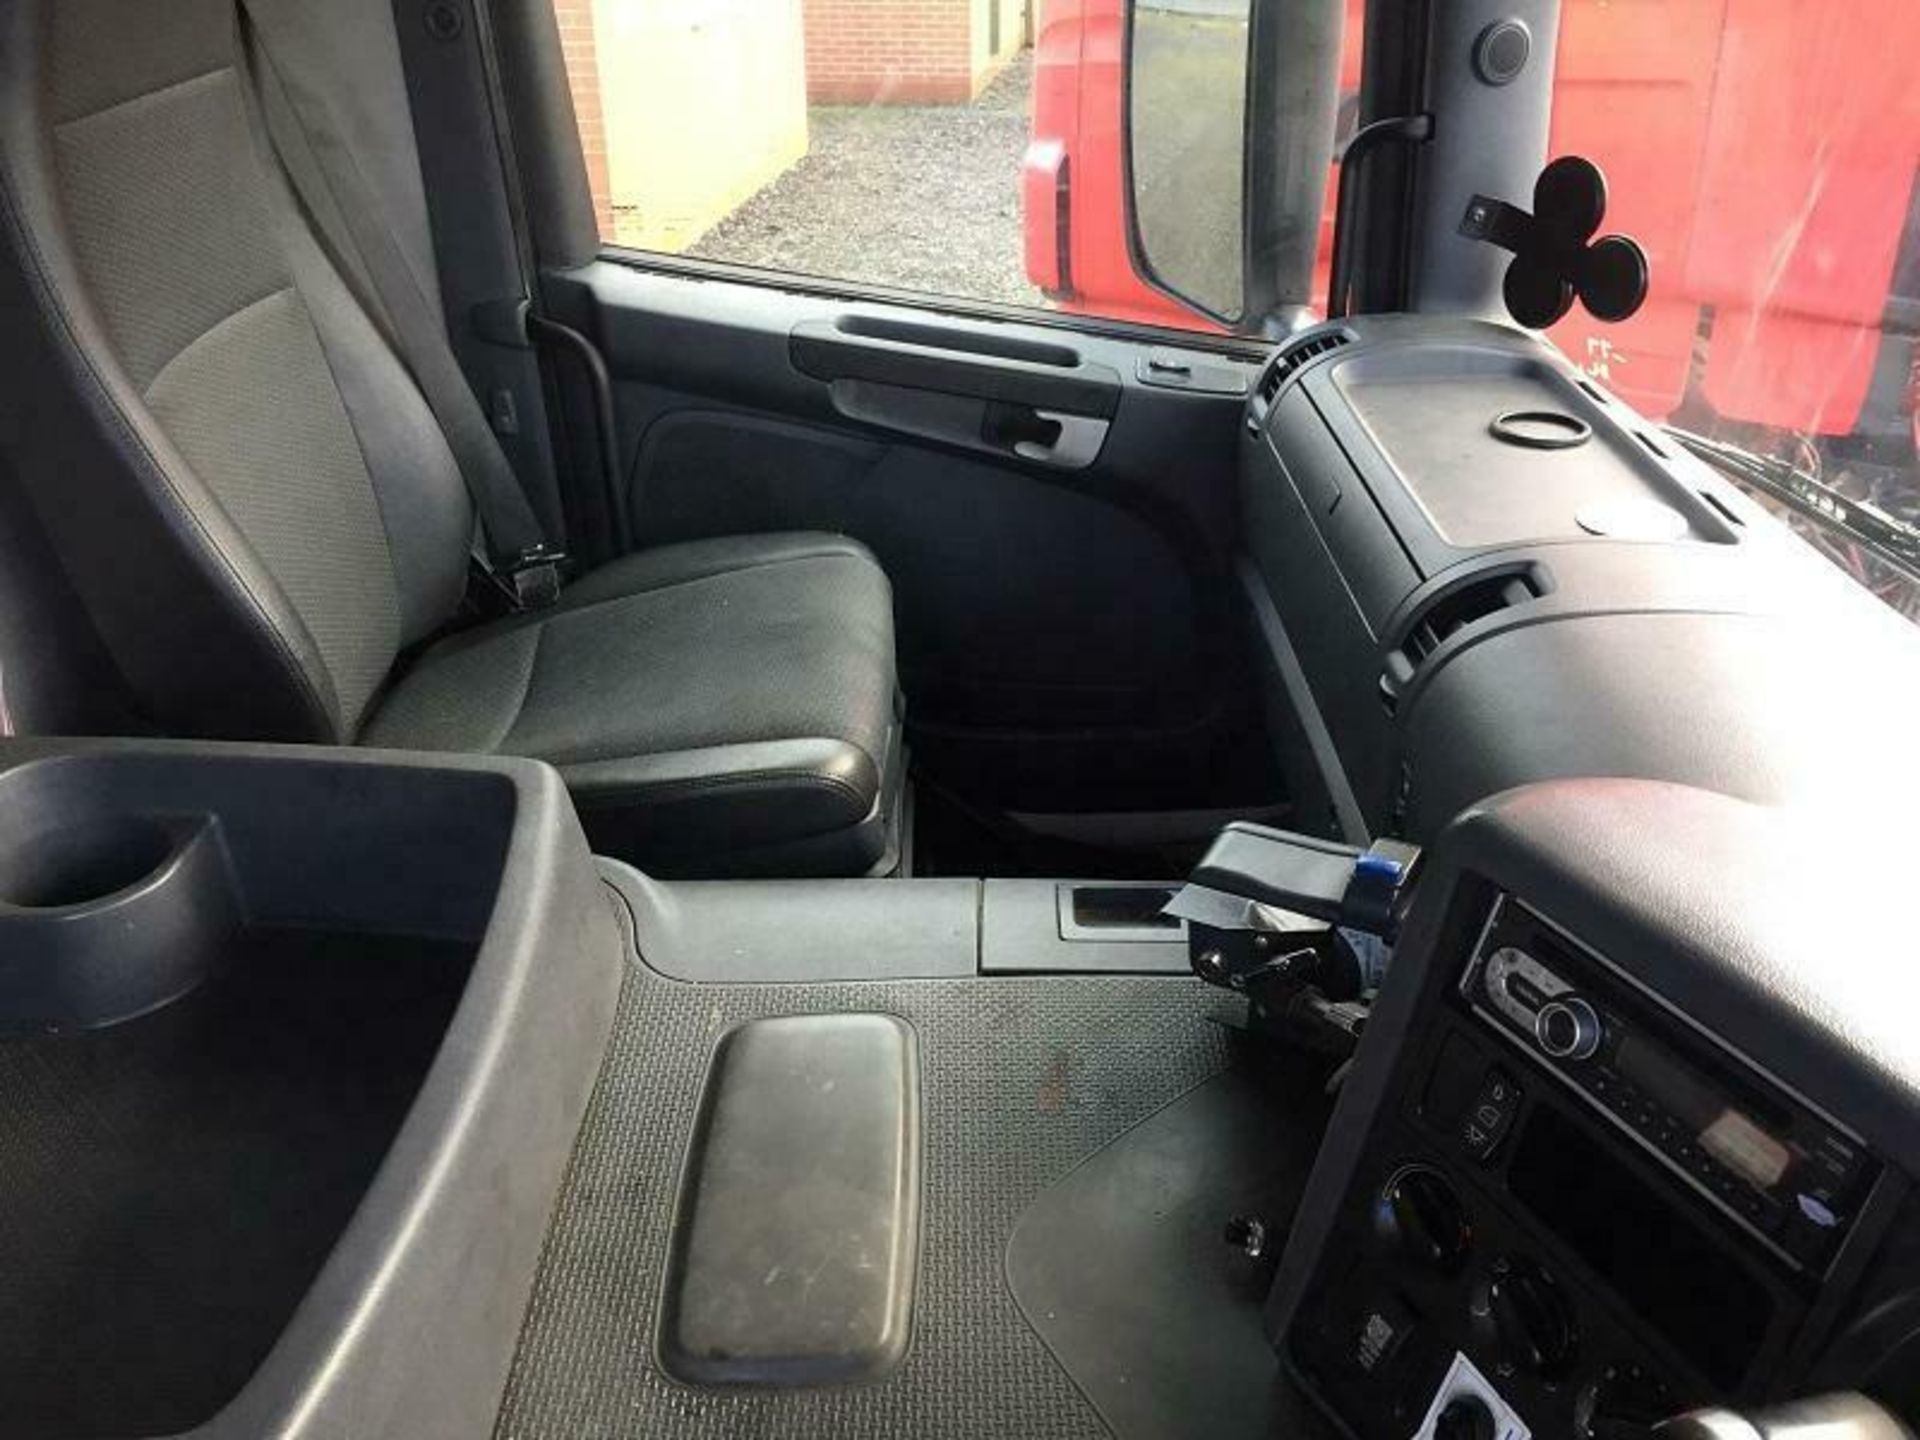 Scania P280 - Image 12 of 12